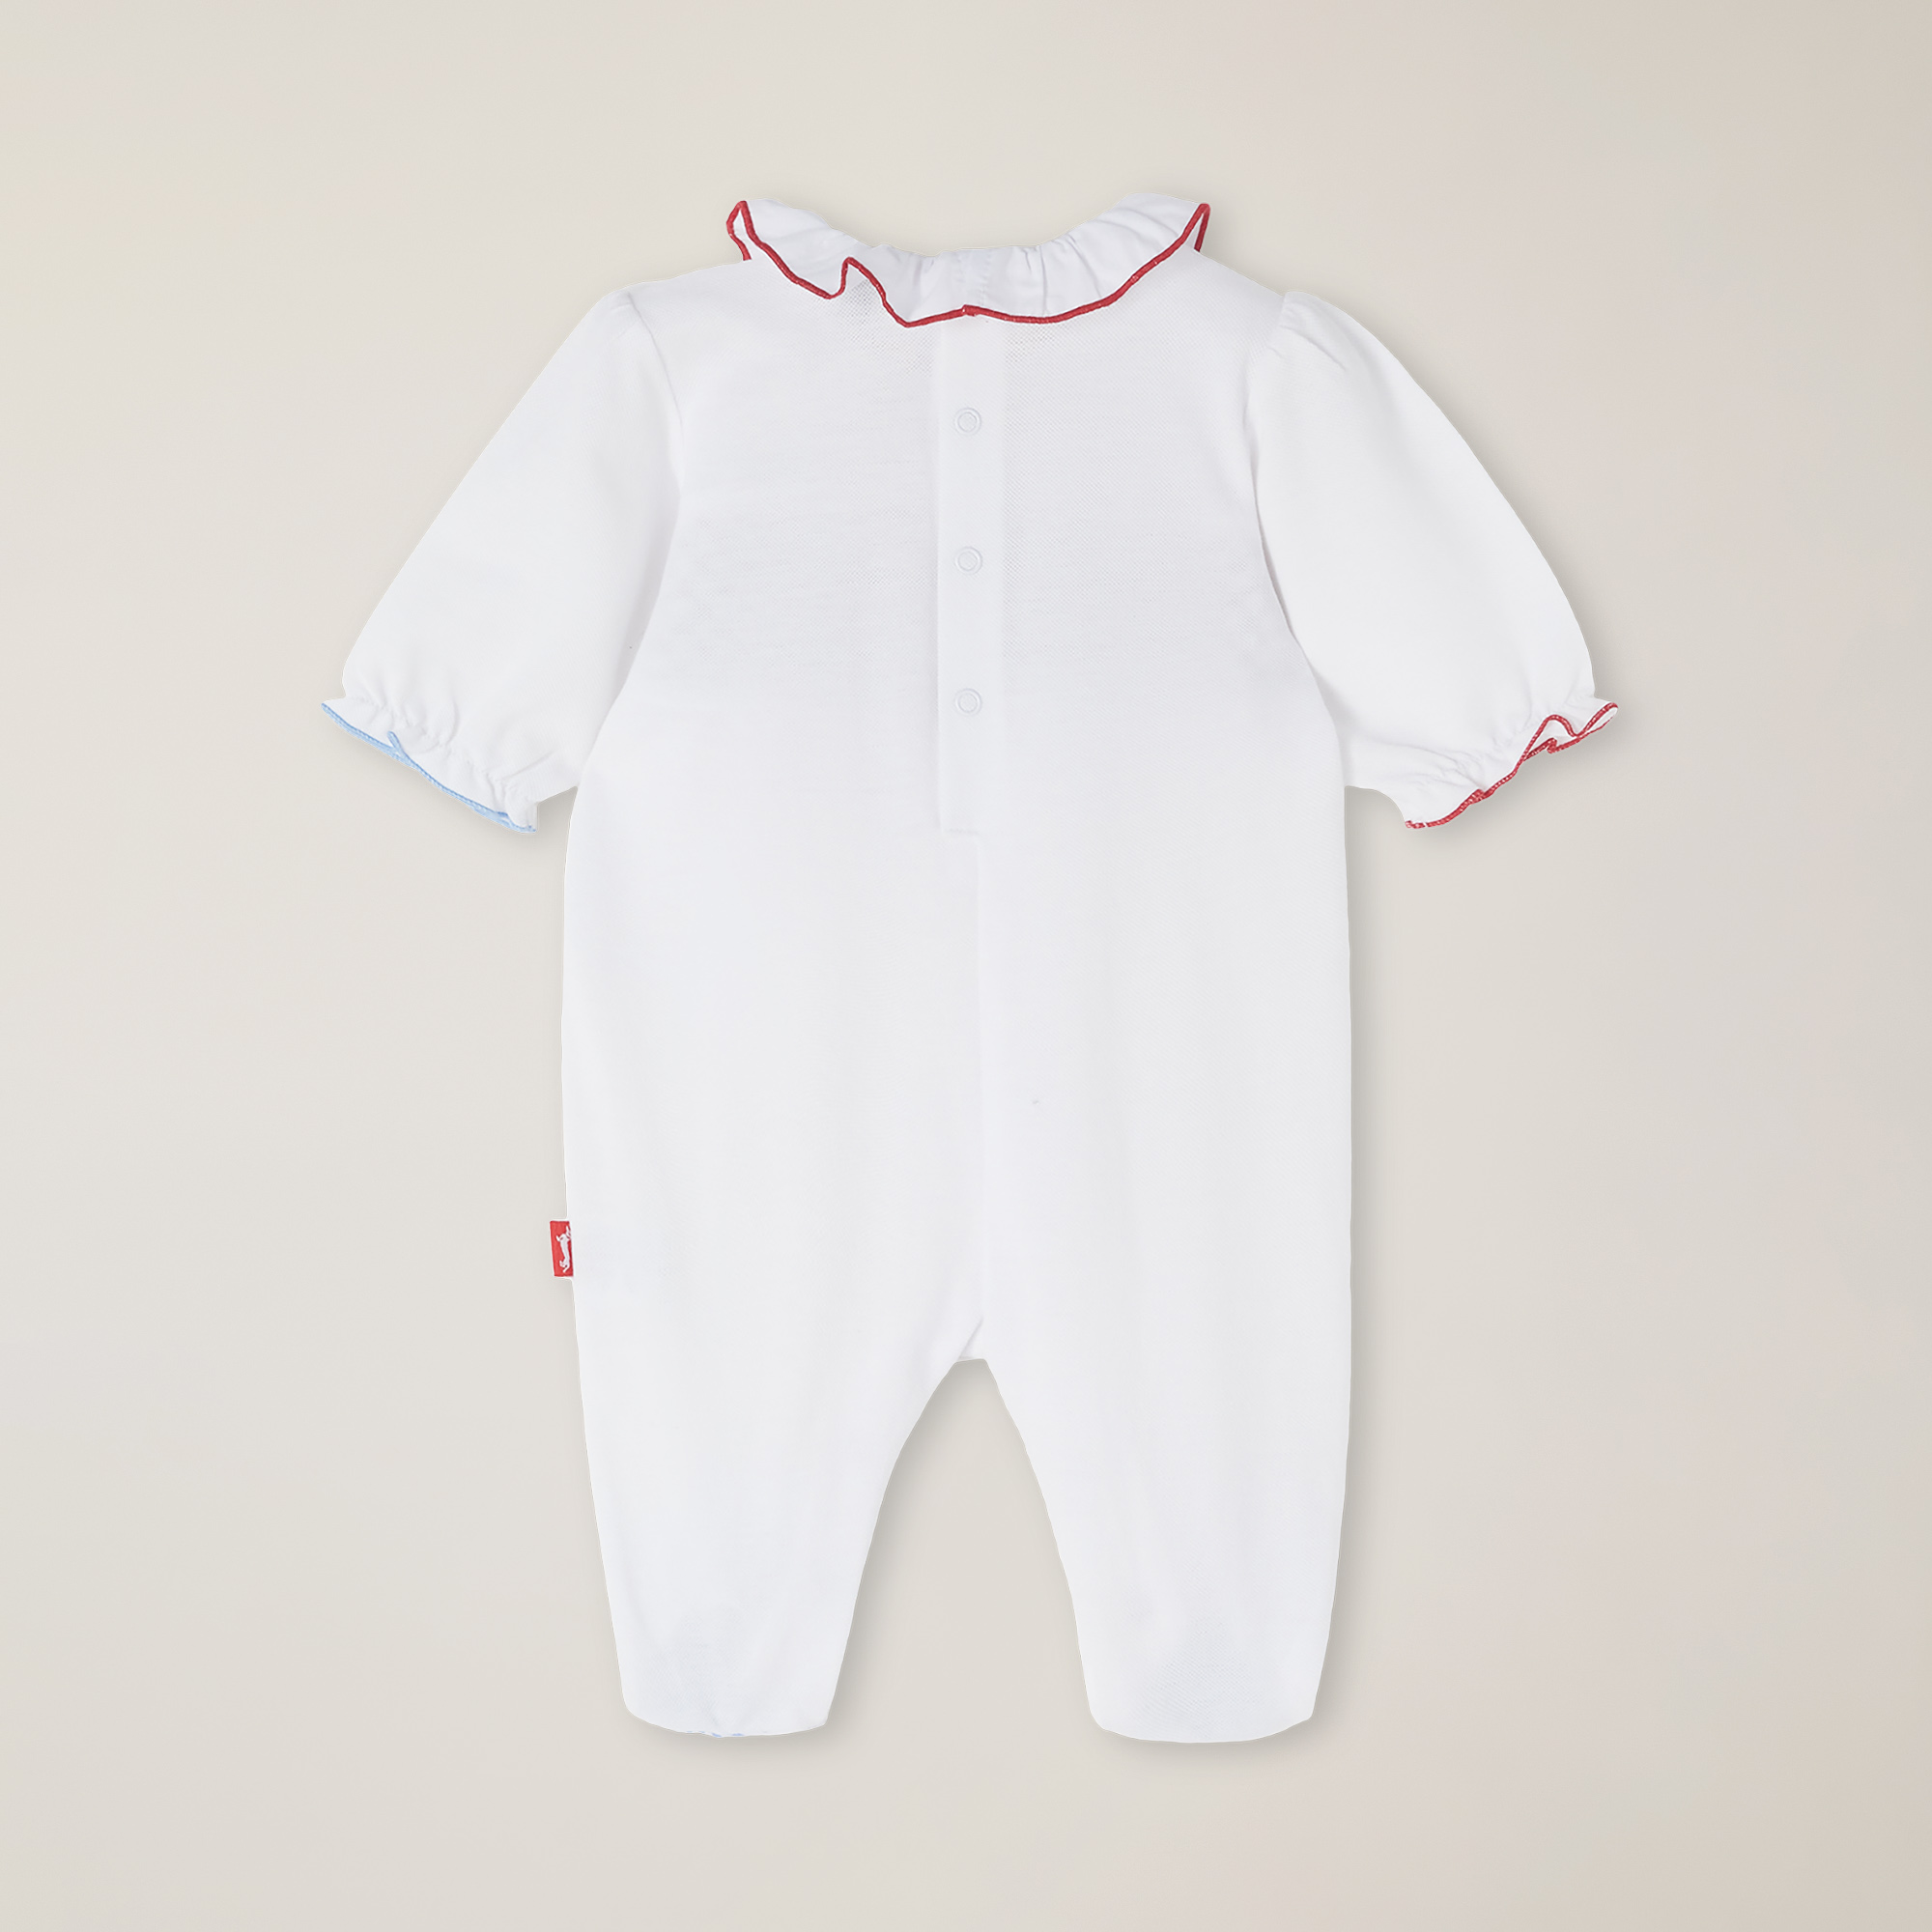 Piqué romper suit with Dachshund embroidery